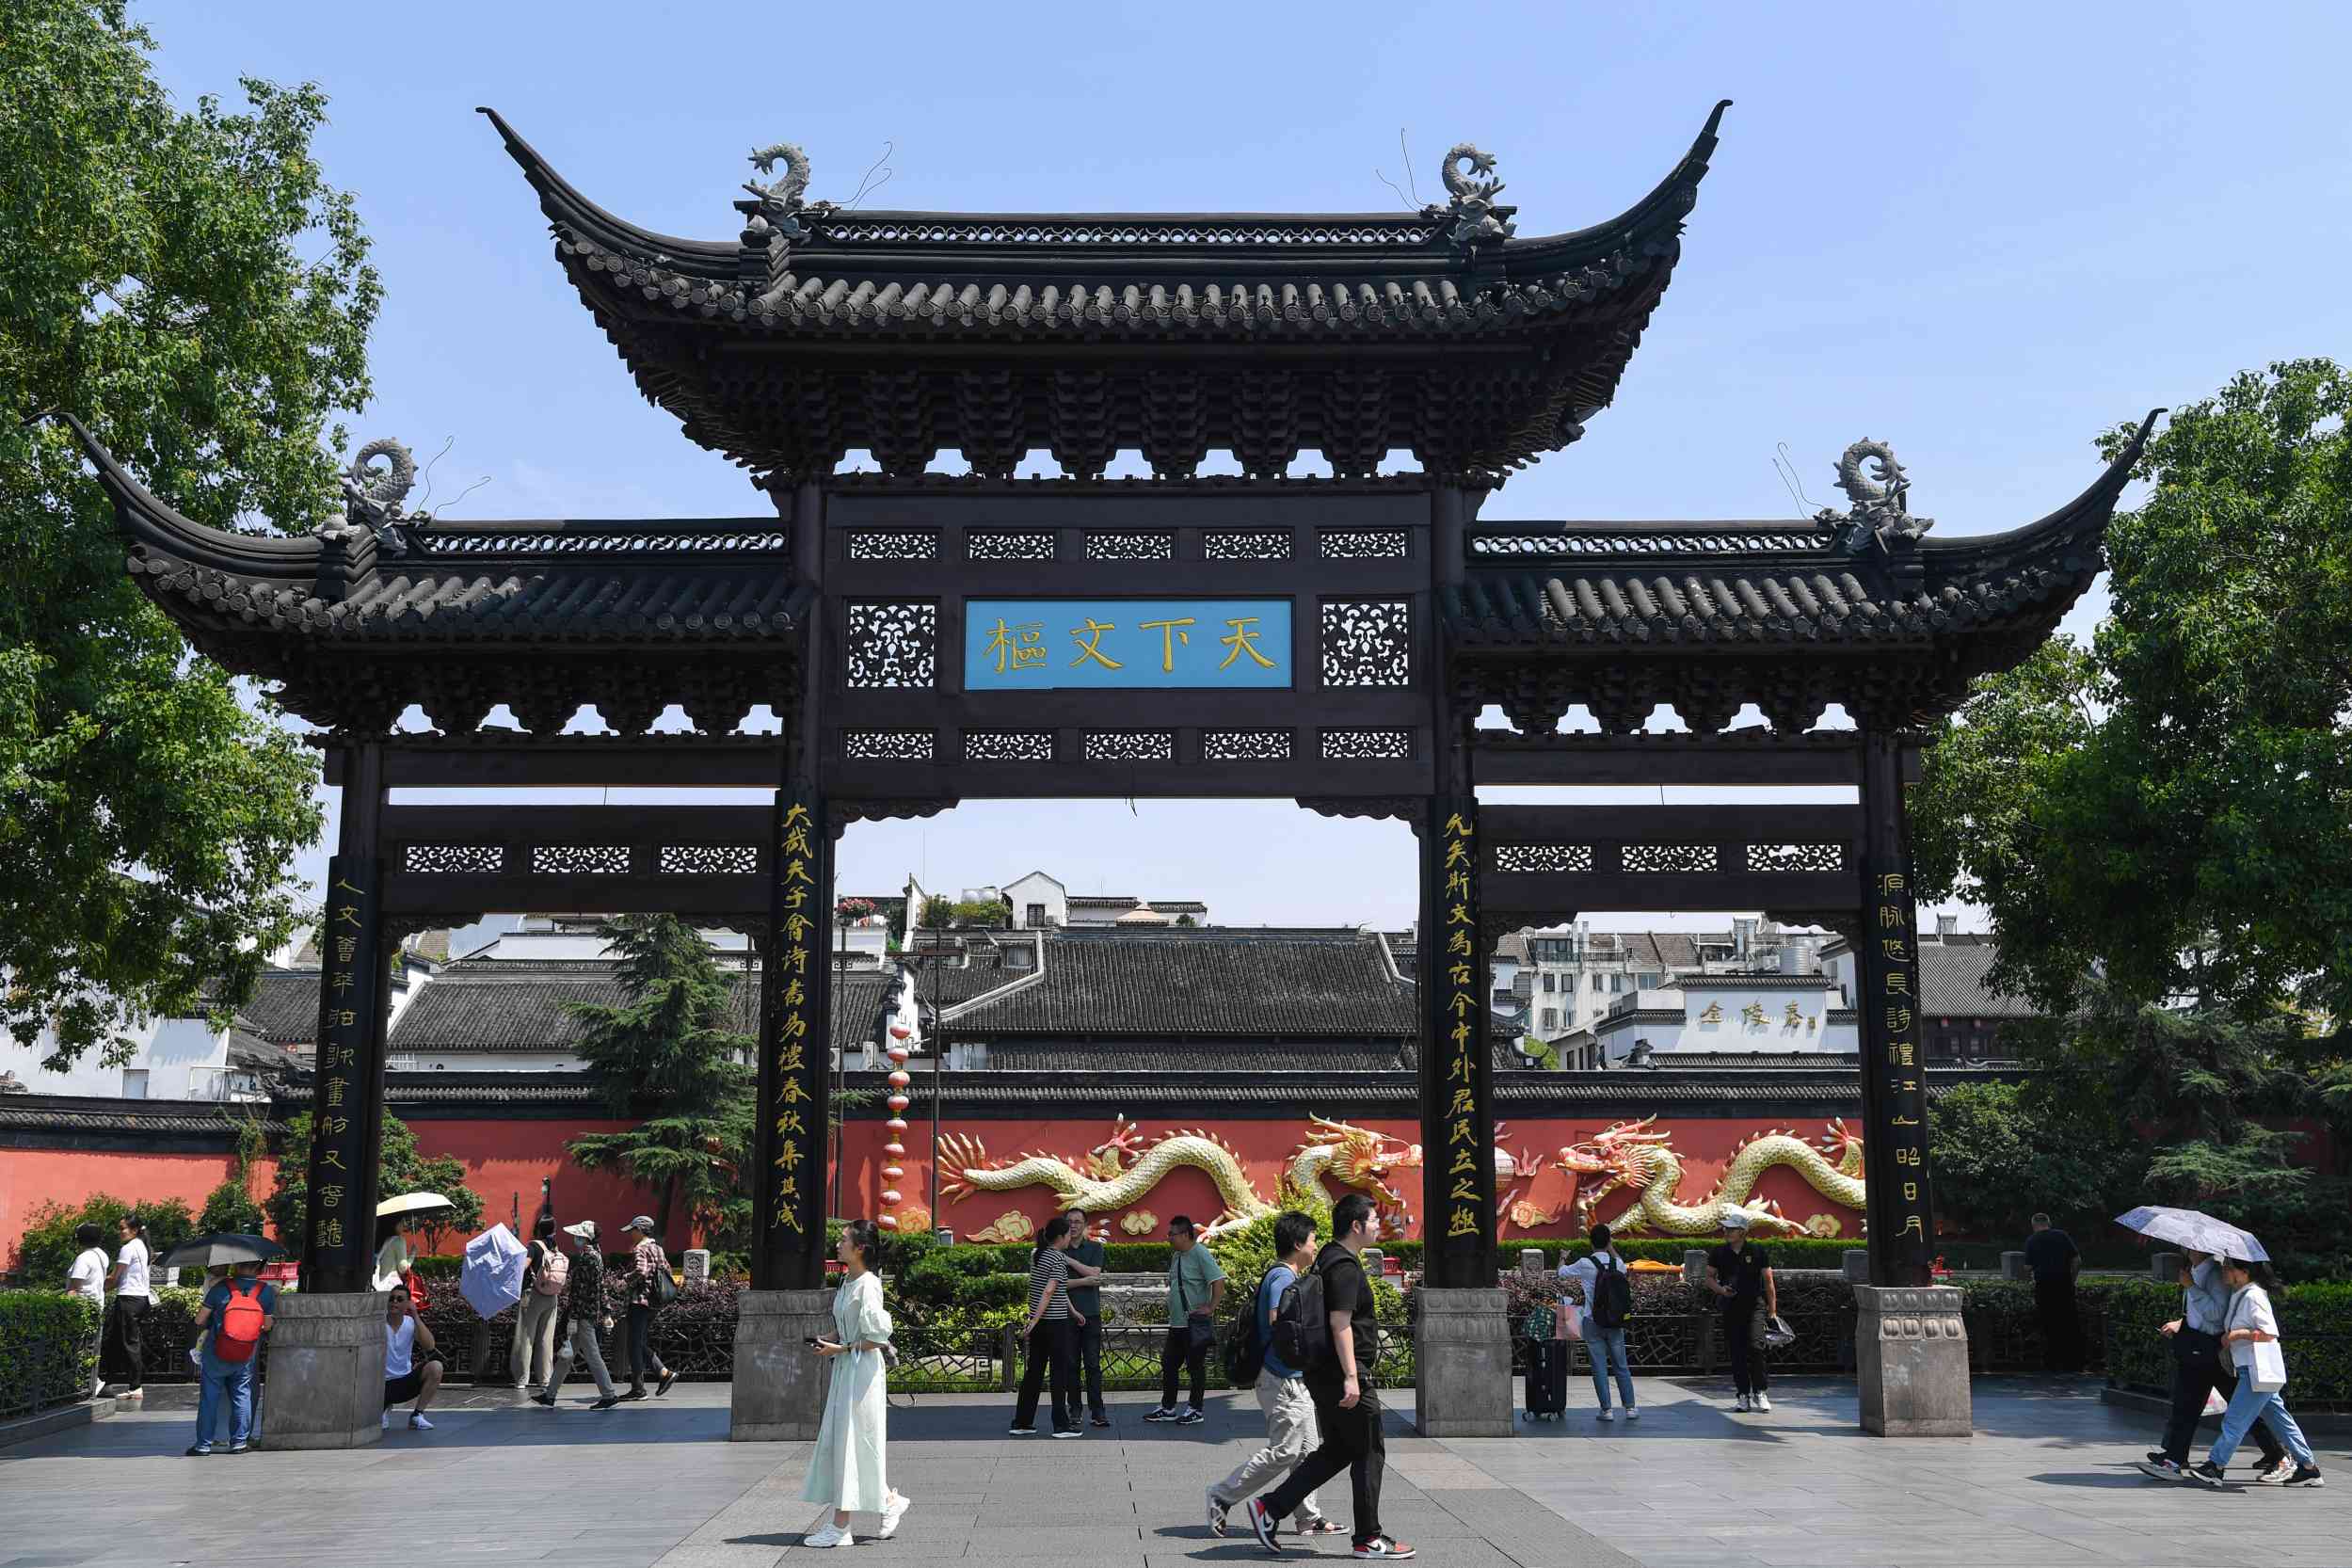 Decoding Cultural Confidence as a Sample City | "Wenshu" Shines New and Shines Jinling - Decoding Cultural Confidence as a Sample Culture in the Ancient Capital of Nanjing | City | Jinling